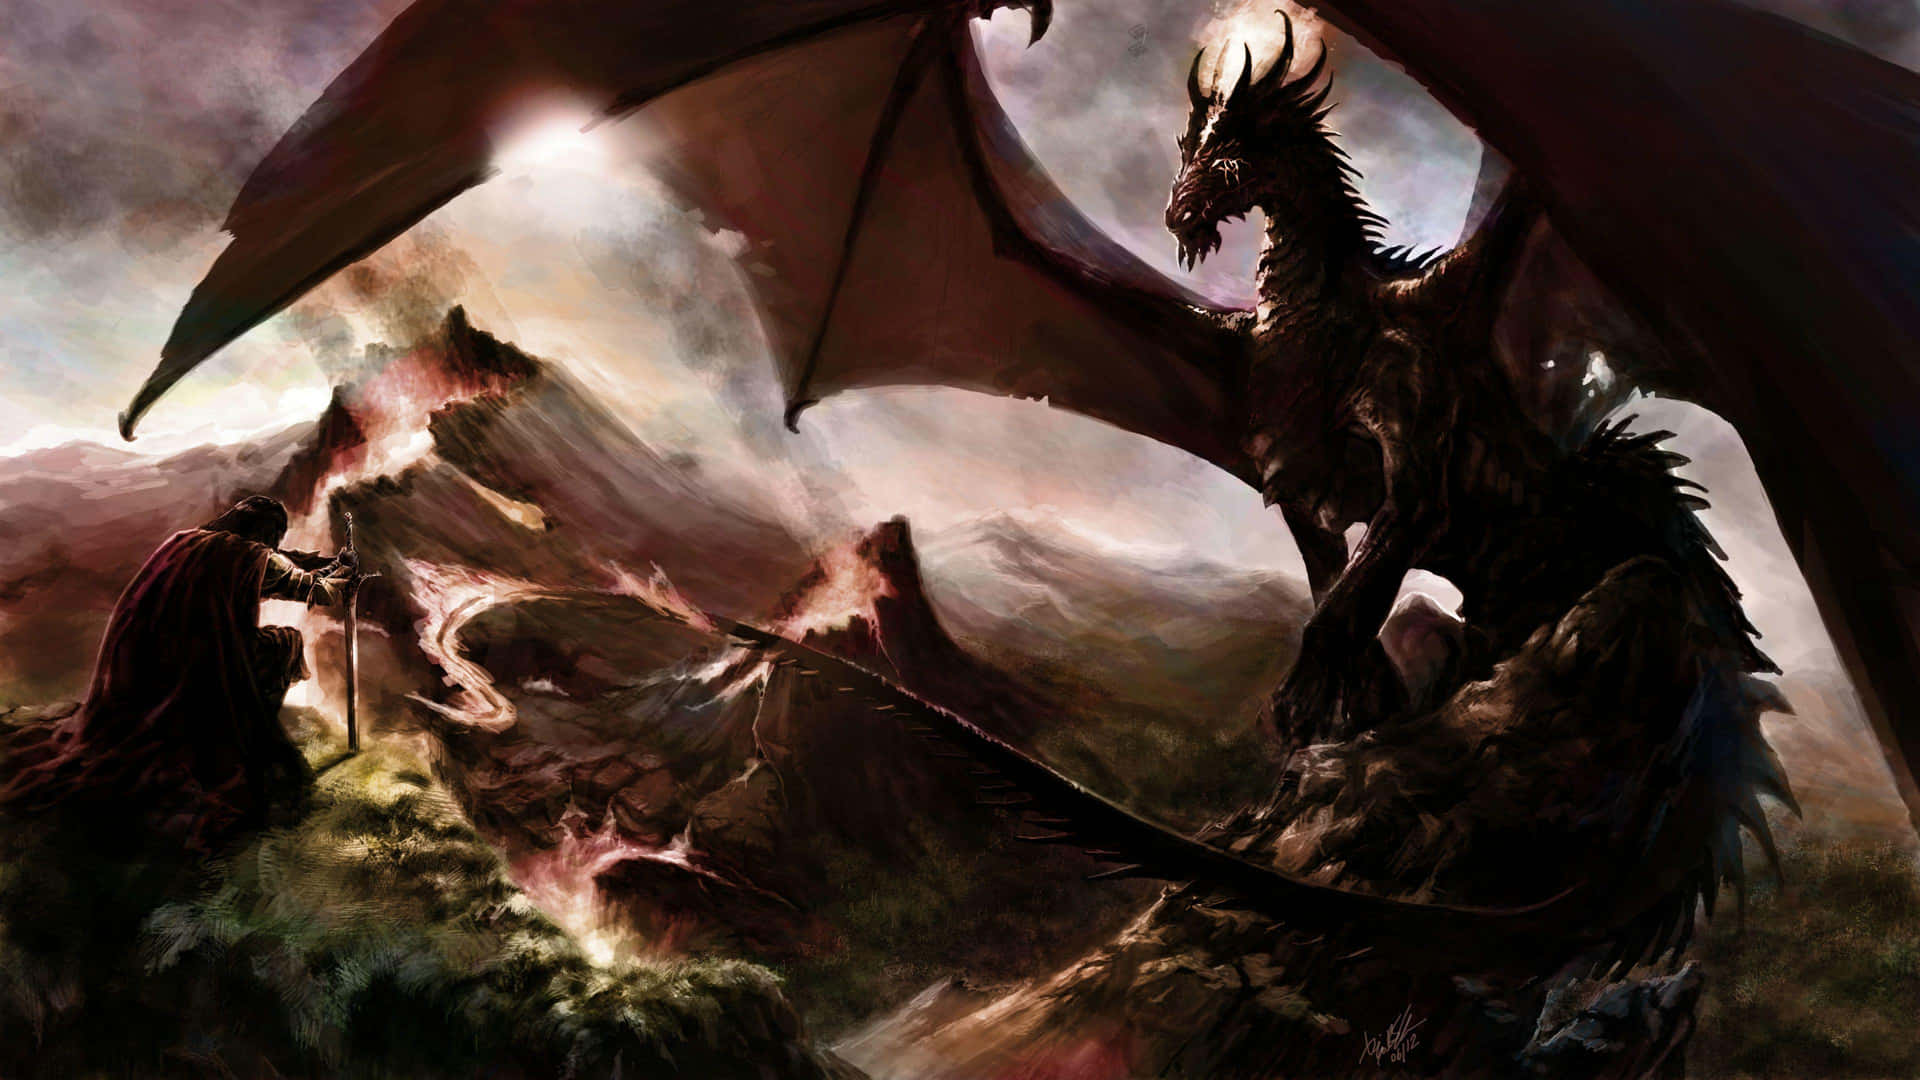 A black dragon stands ready to protect its hoard of treasures Wallpaper